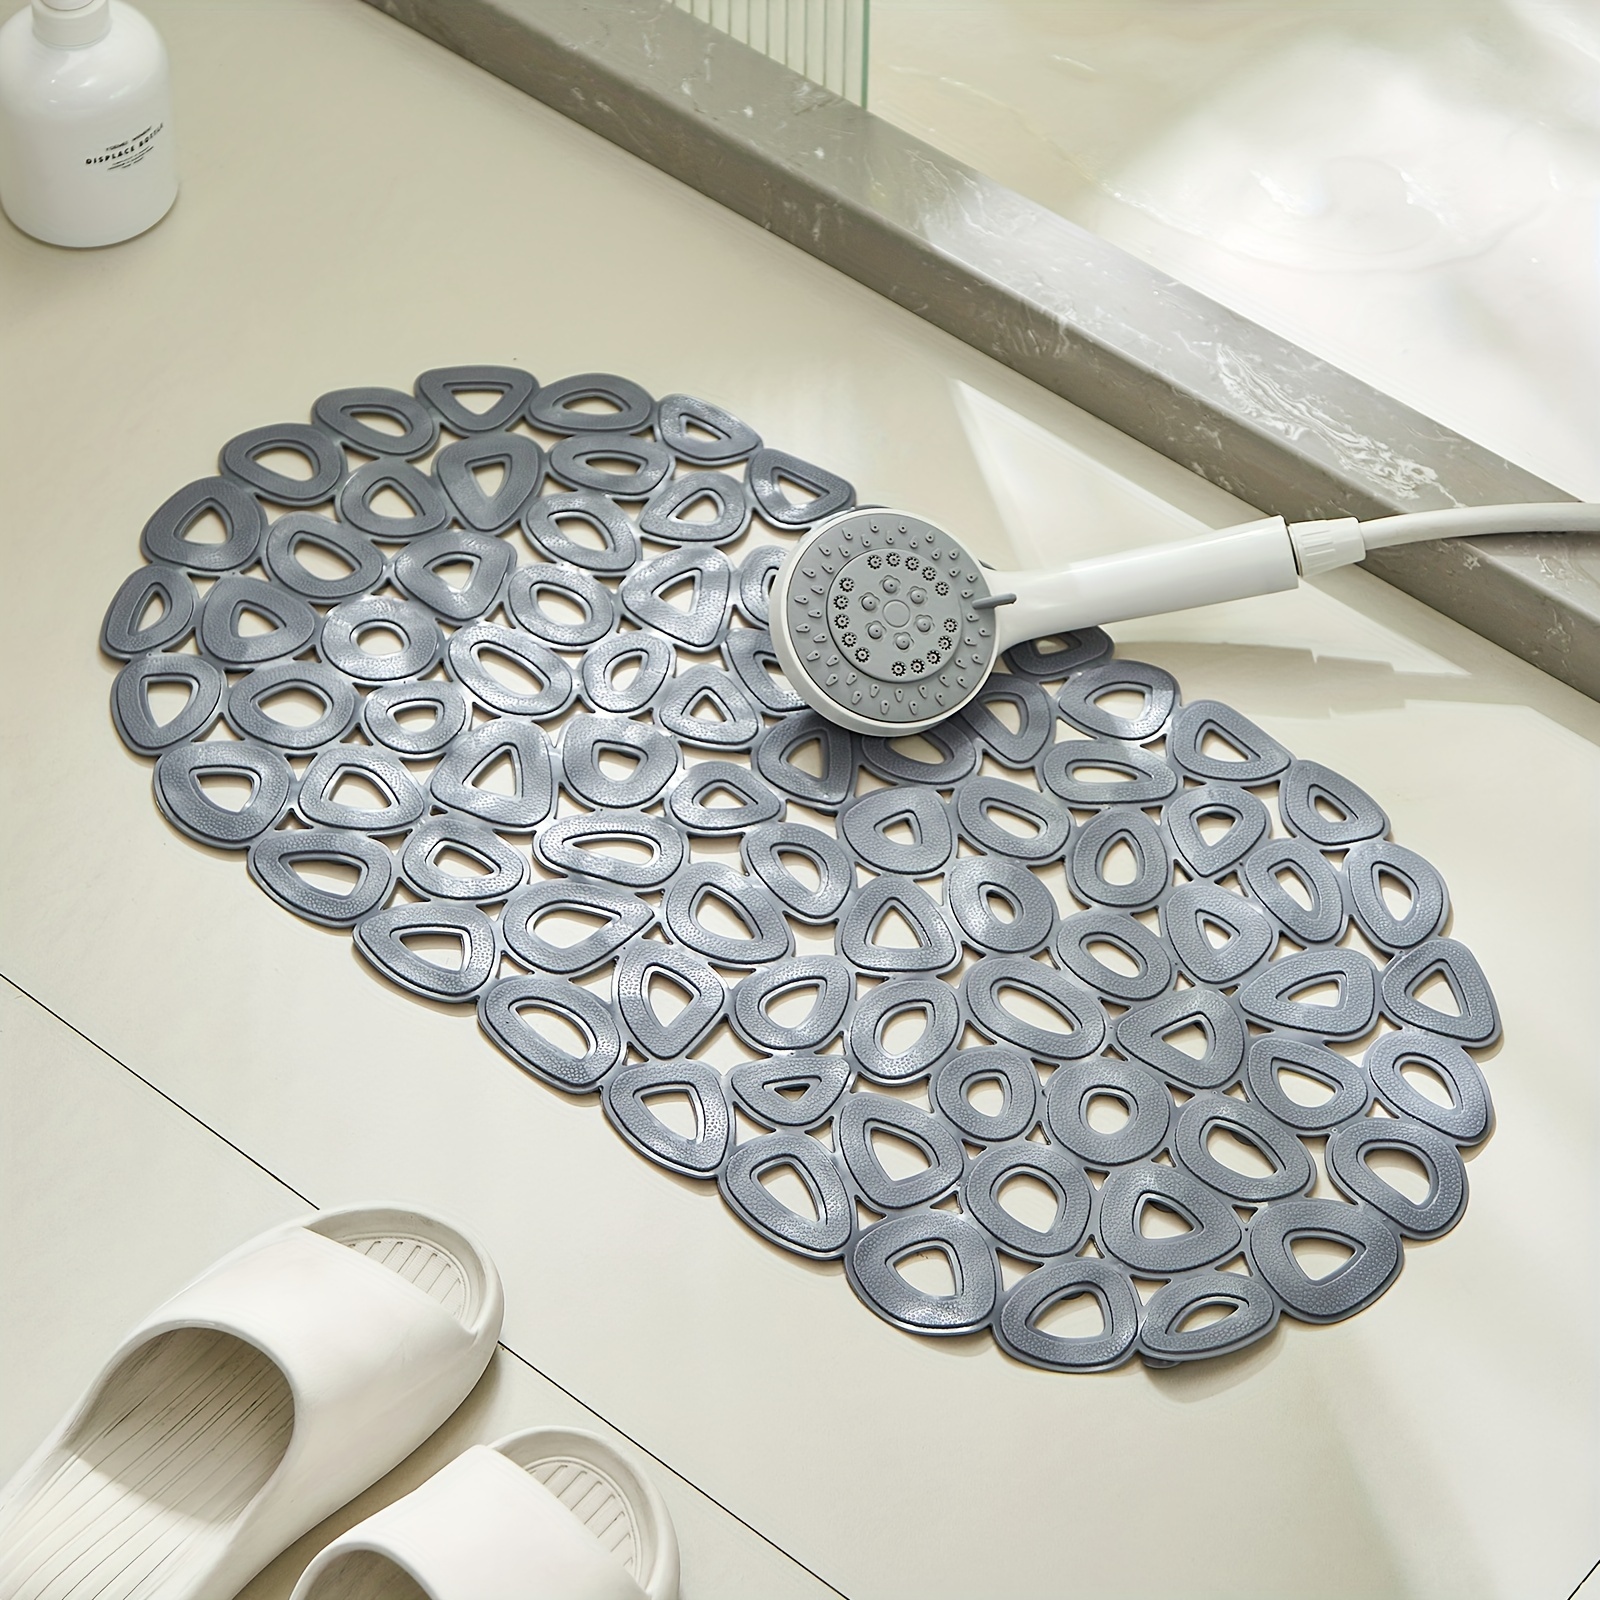 

1pc Bathroom Non-slip Mat With Drain Hole & Suction Cup, Oval Hollow Design Shower Floor Mat, Suitable For Bathroom Use, Ideal Bathroom Accessories